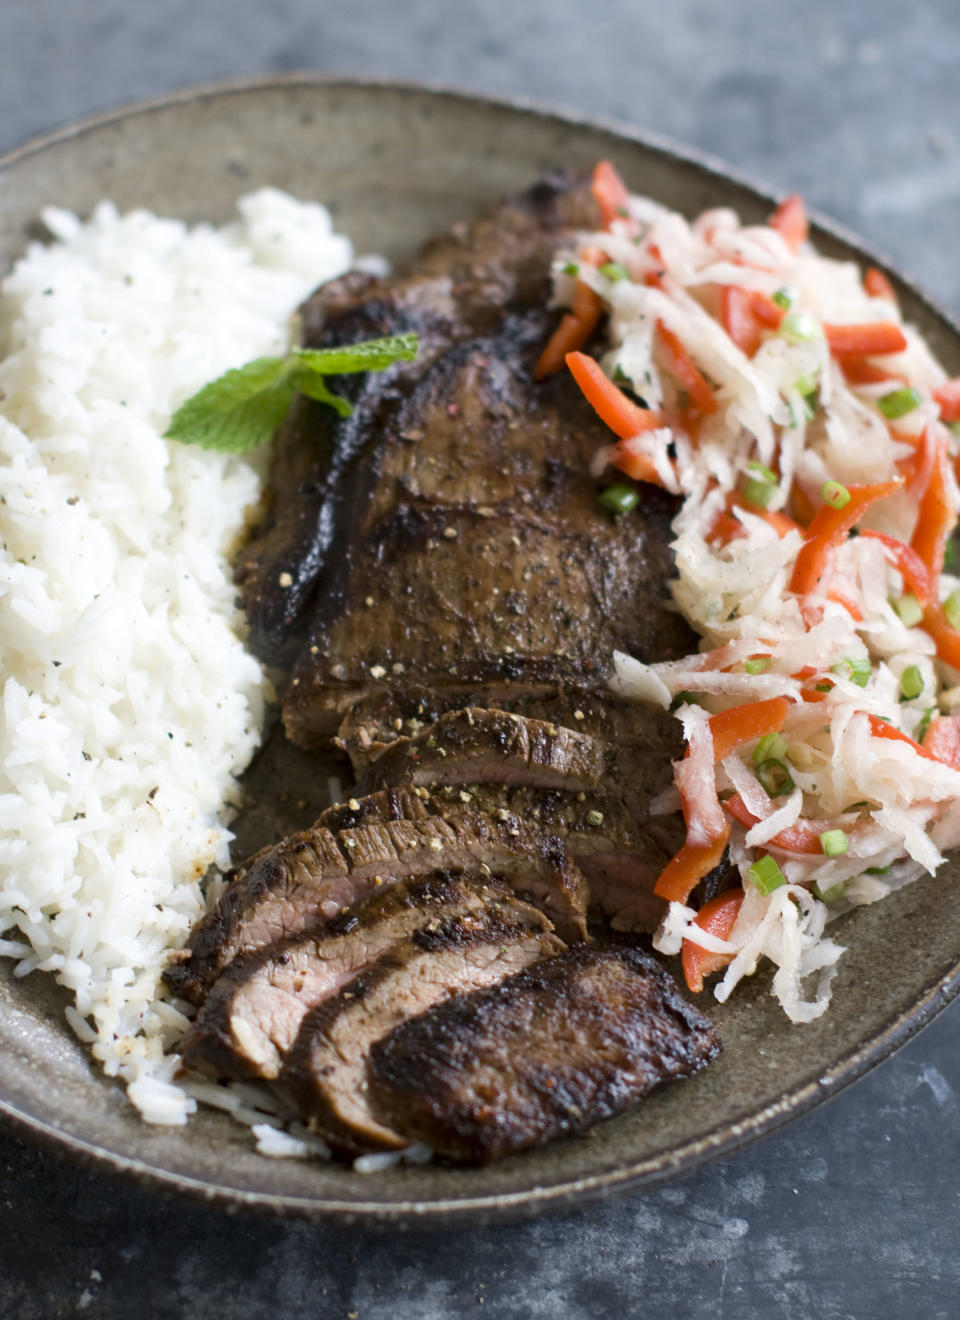 This Dec. 2, 2013 photo shows pan seared flank steak with daikon slaw in Concord, N.H. Daikon radish resemble giant white carrots, but have a mild peppery bite. (AP Photo/Matthew Mead)